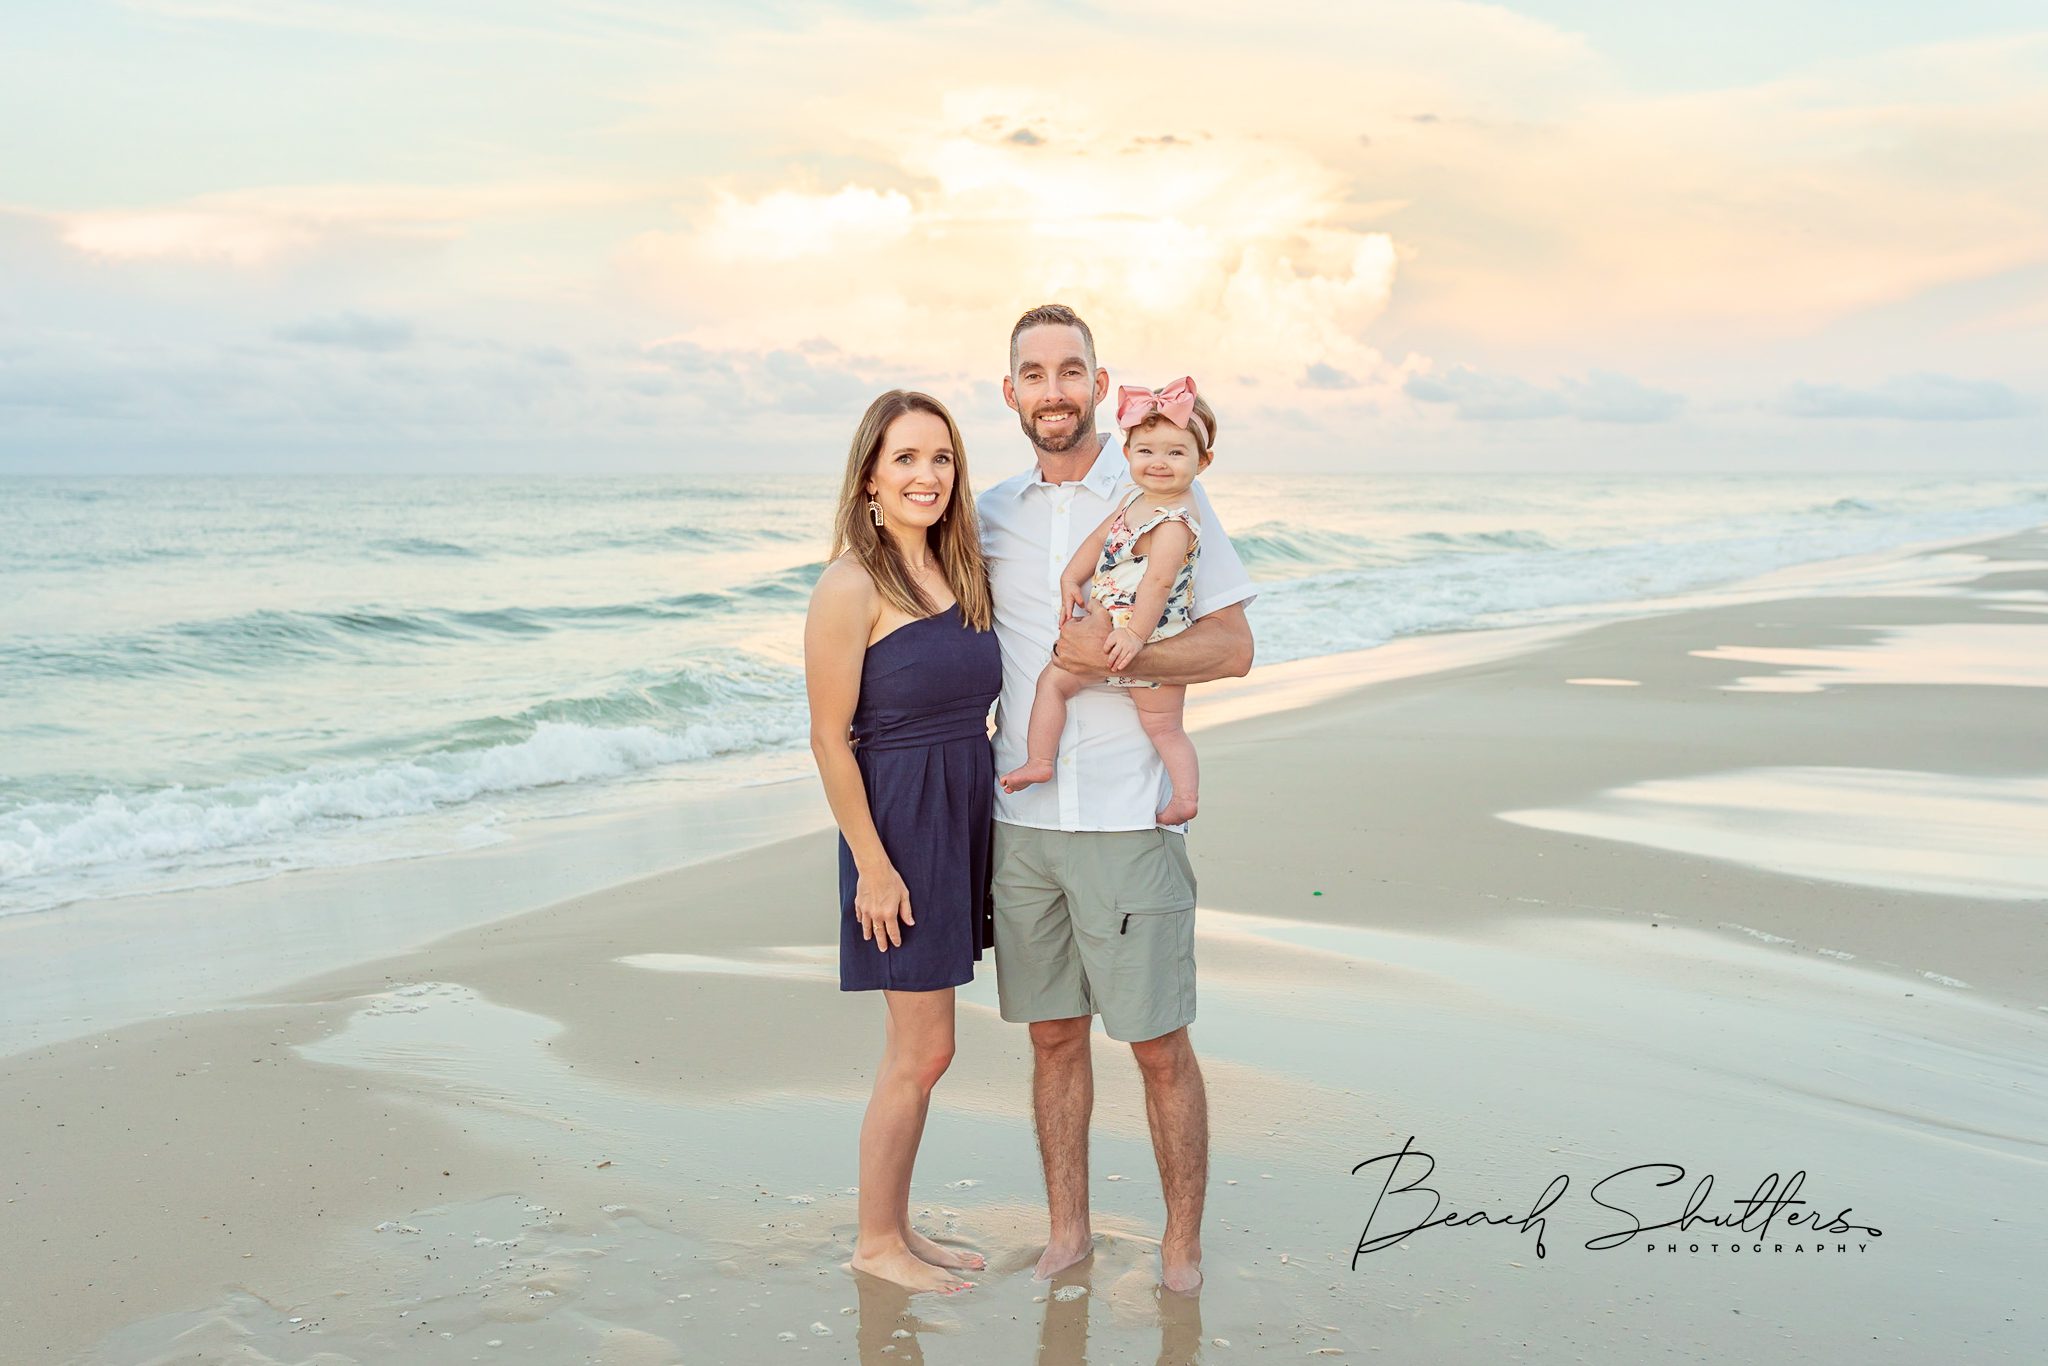 Great Family Beach Portraits by Beach Shutters